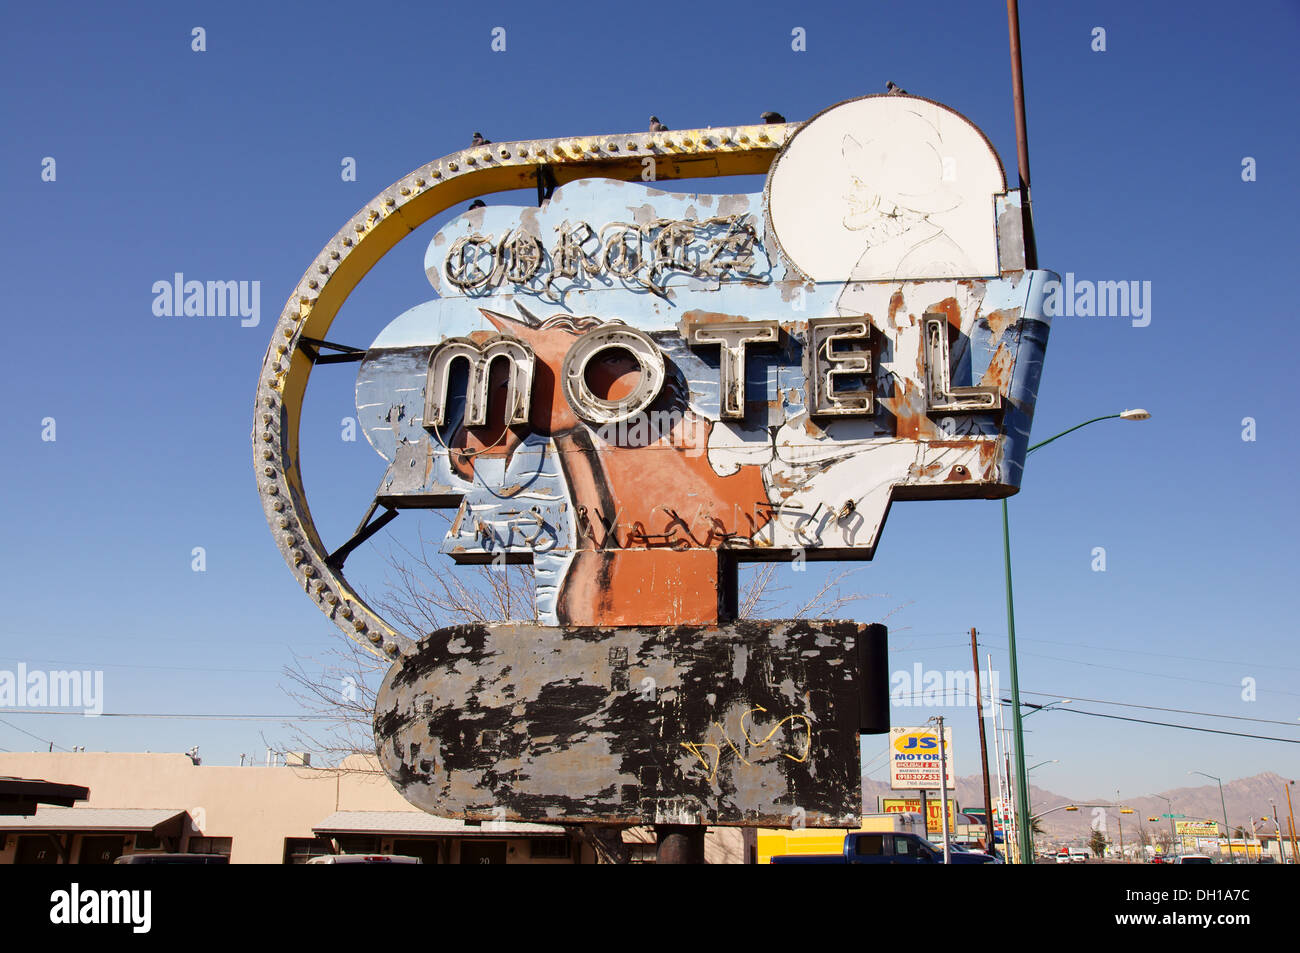 sign motel el paso texas tx decay ruin destroy annihilate blast crush damage dash disappoint foul up frustrate Stock Photo